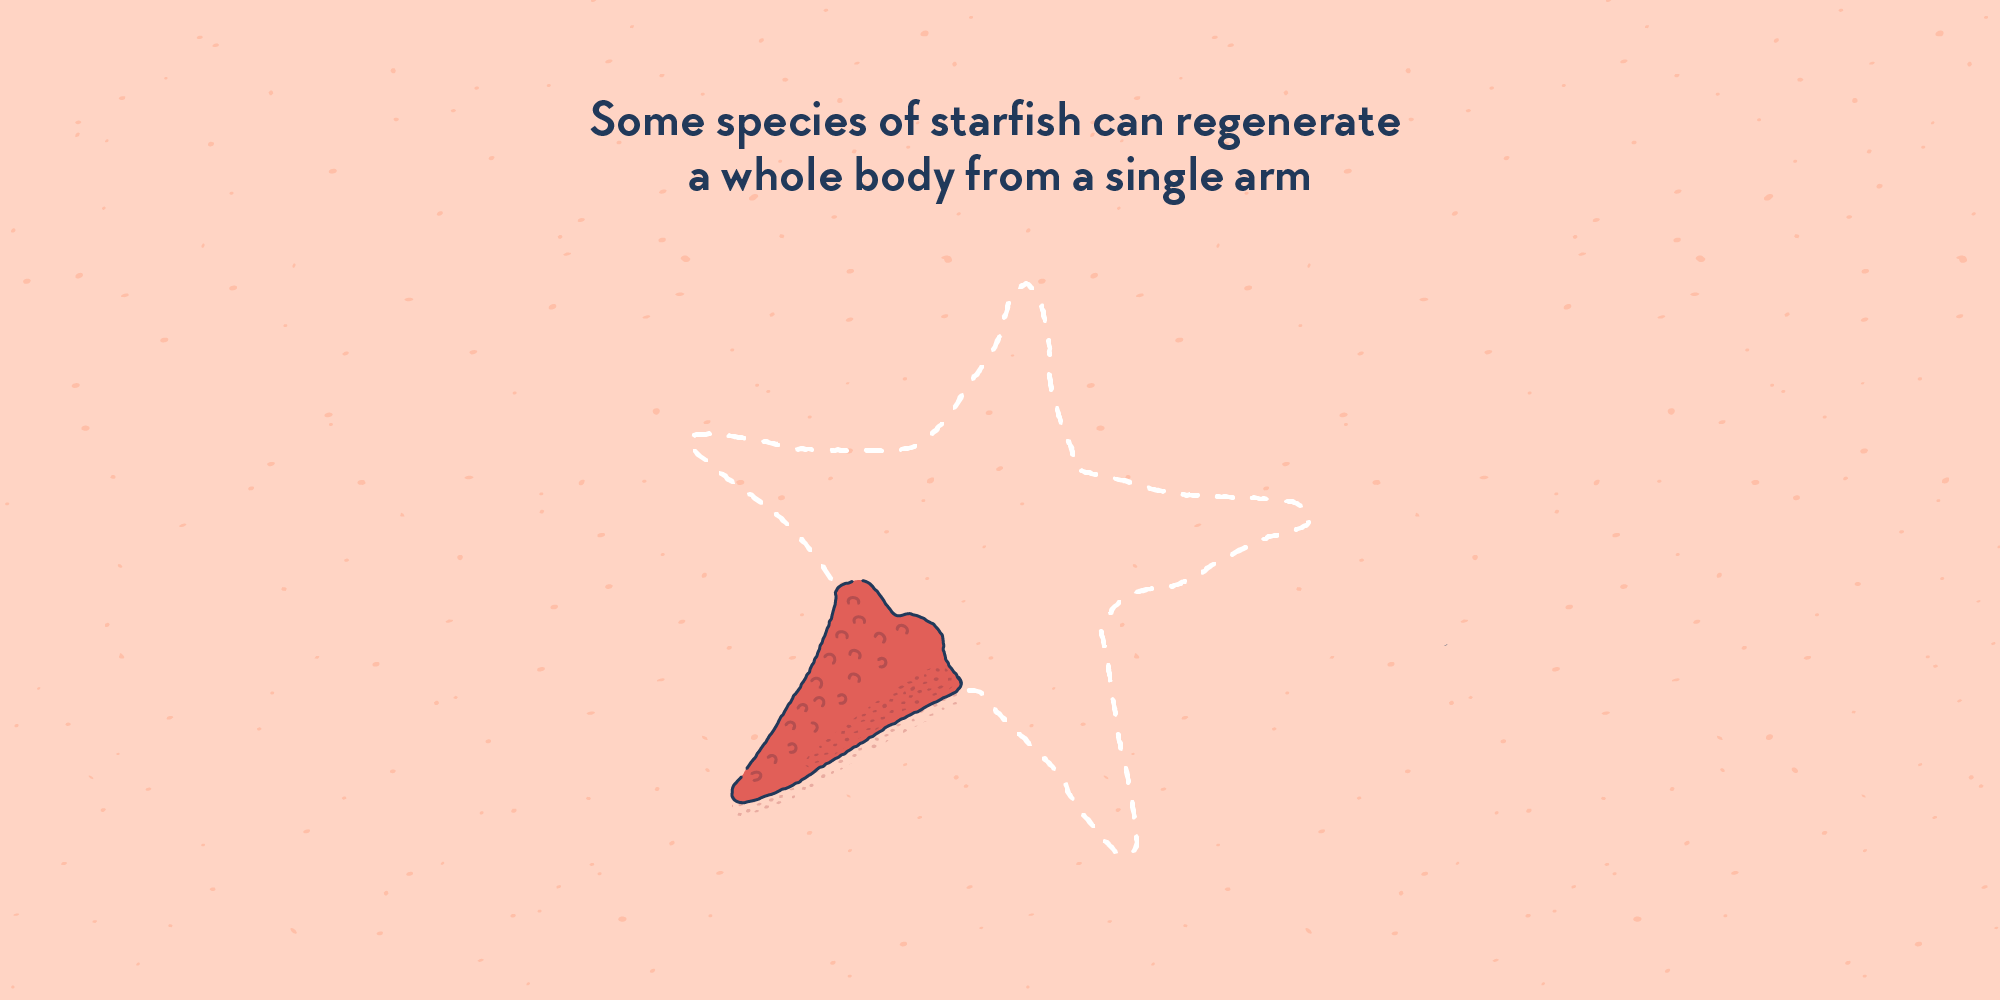 One single arm of a five-armed starfish. A dotted line mark the star shape of the full animal.